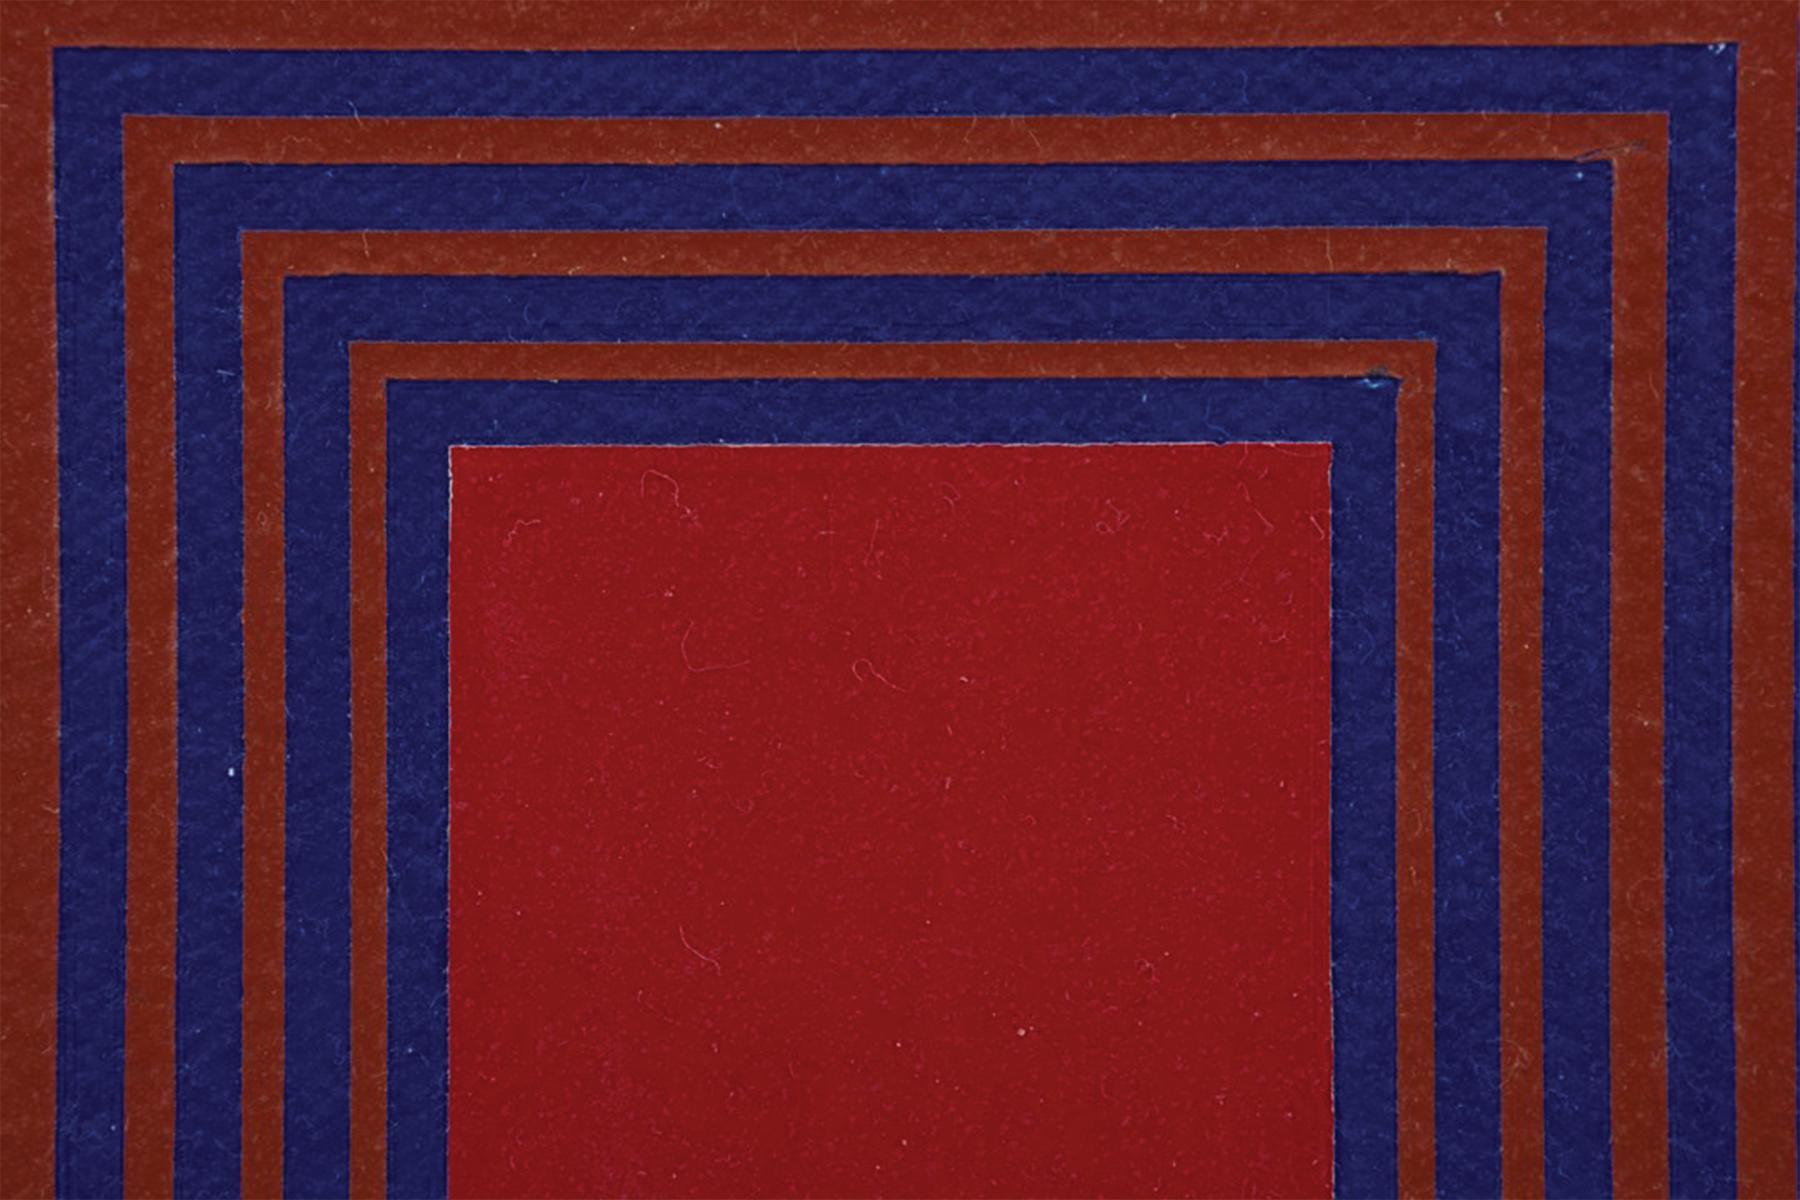 Richard Anuszkiewicz (American, 1930-2020)
Temple of Evening Reds, 1983
Acrylic on canvas
Signed verso
36 x 36 inches
36.75 x 36.75 inches, framed

Richard Anuszkiewicz was born in Erie, Pennsylvania to Polish immigrants. While at the Cleveland